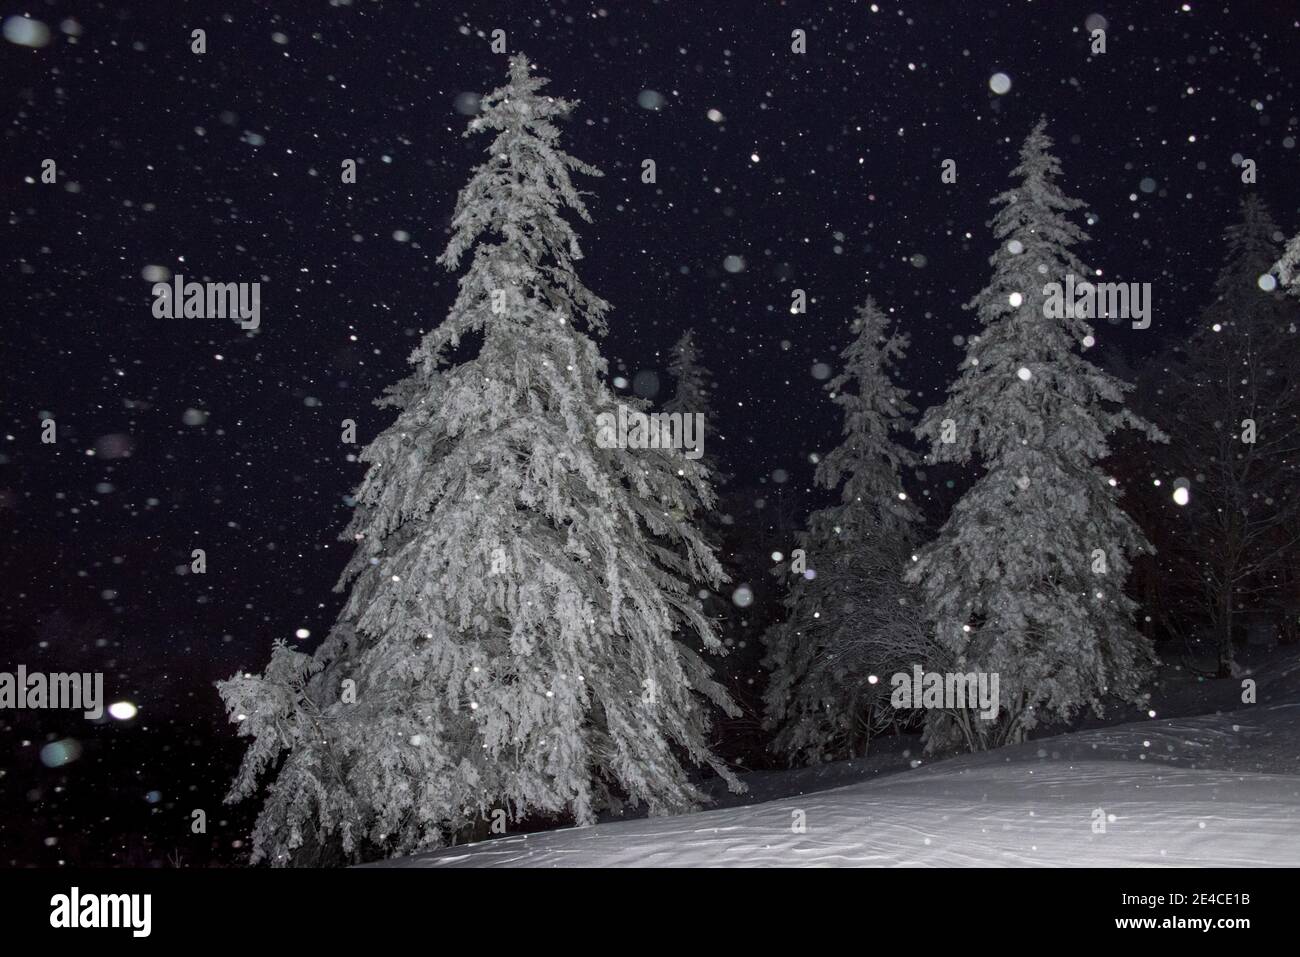 at night, snow-covered fir trees with light snowfall Stock Photo